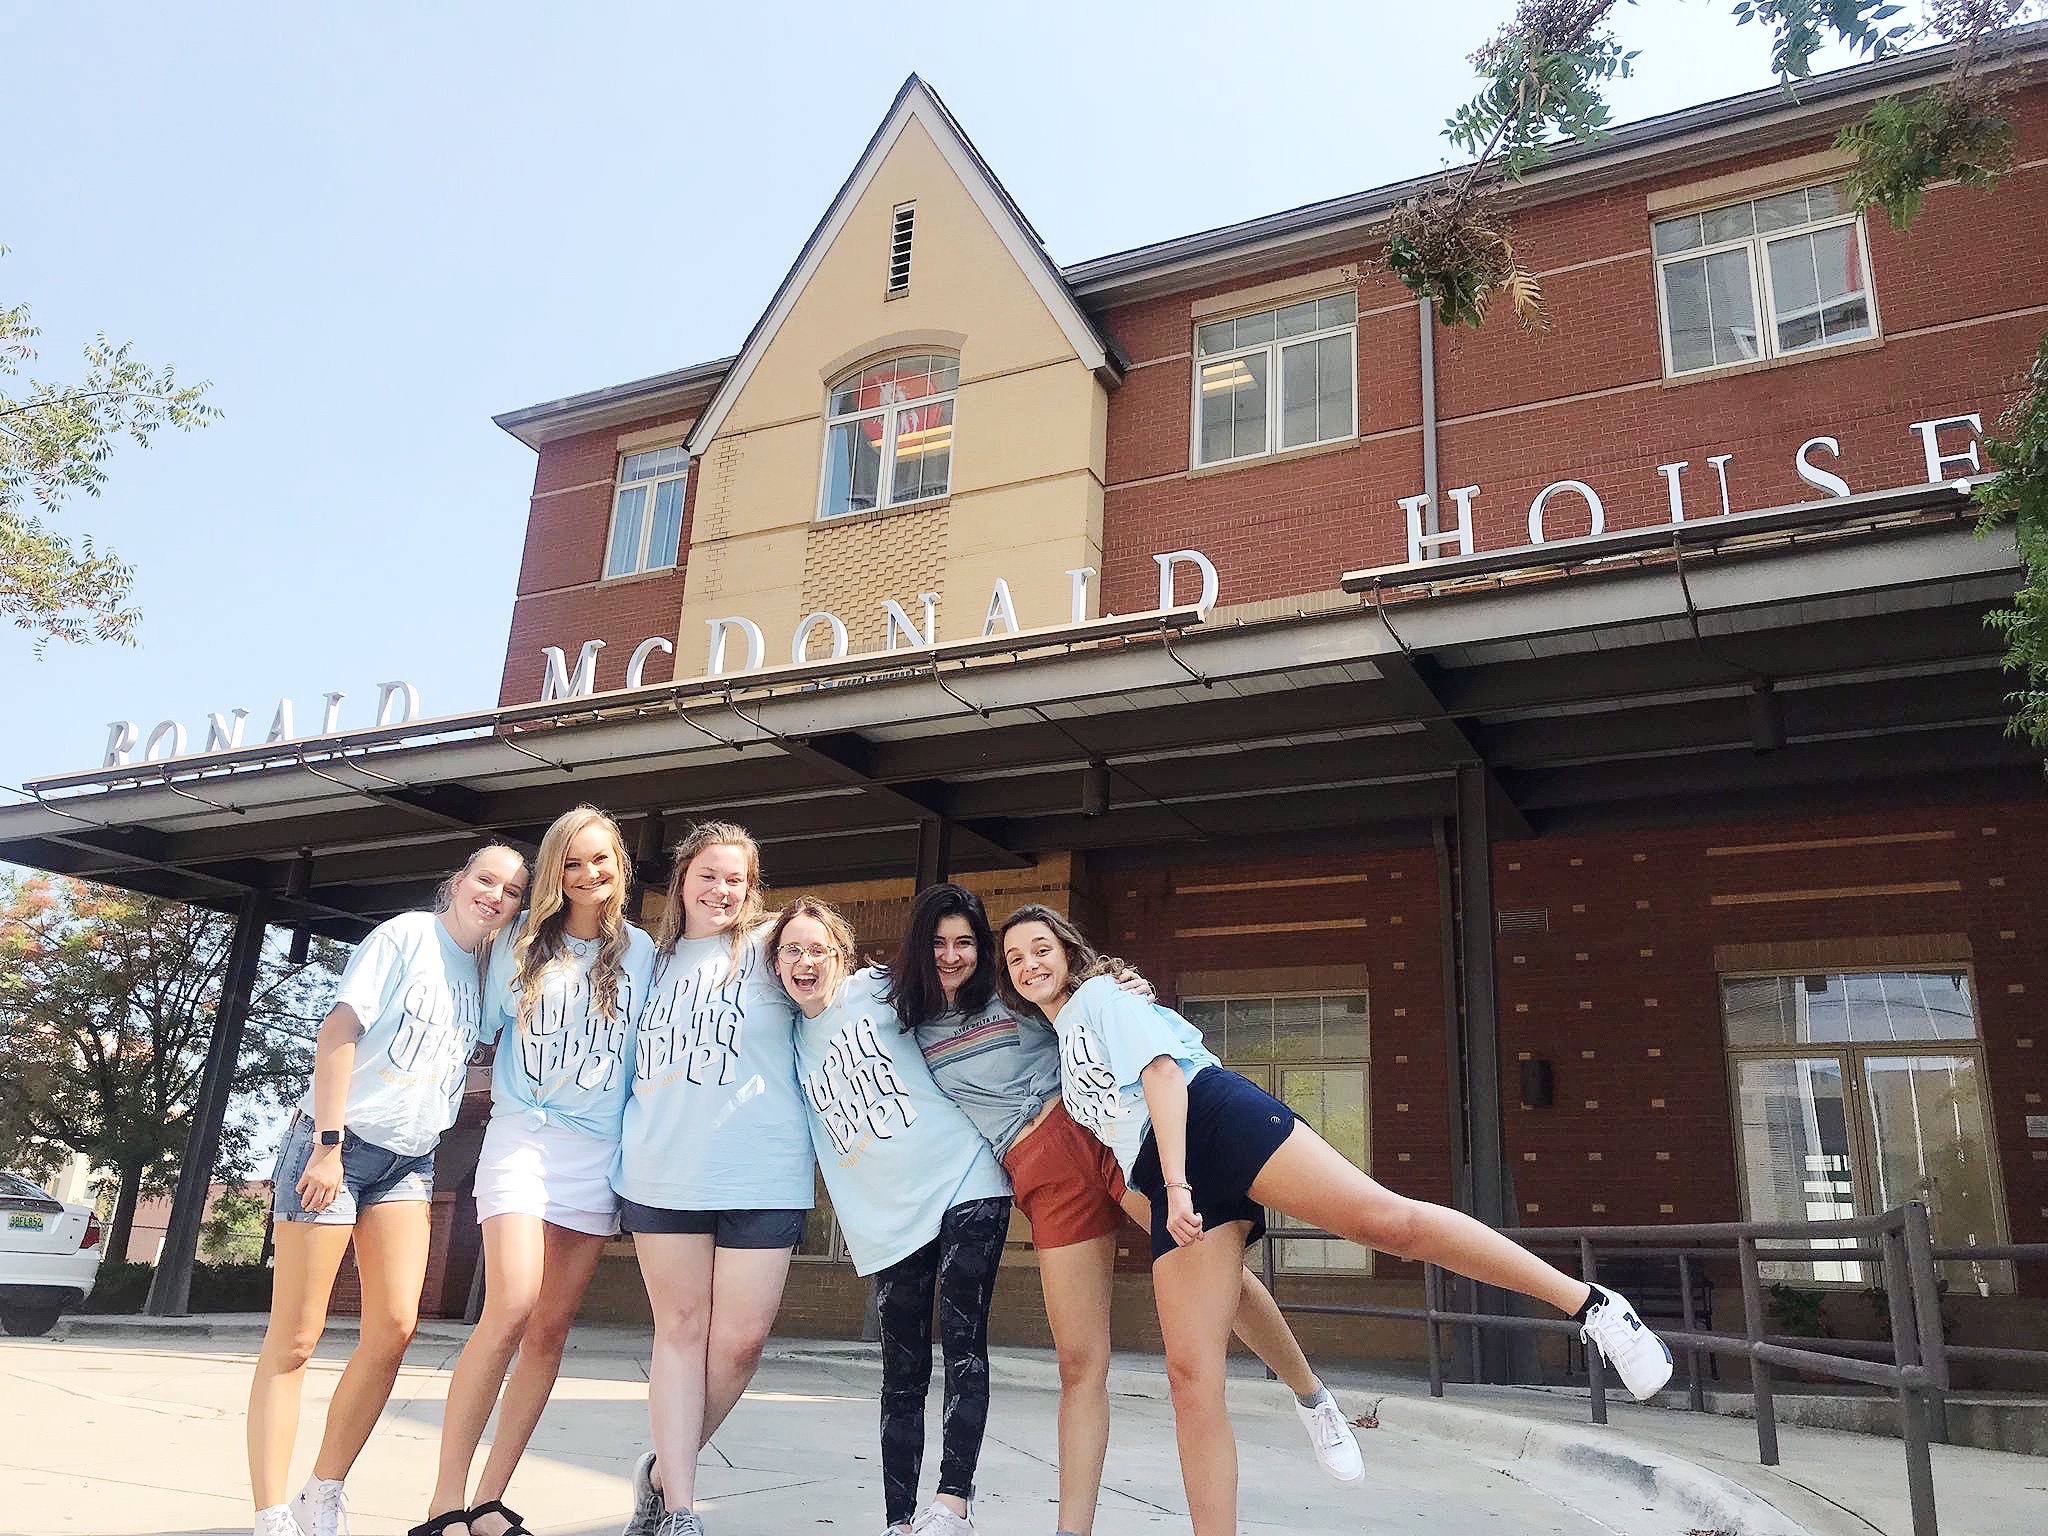 Members of Alpha Delta Pi pose for a photo outside of the Ronald McDonald House Charities.